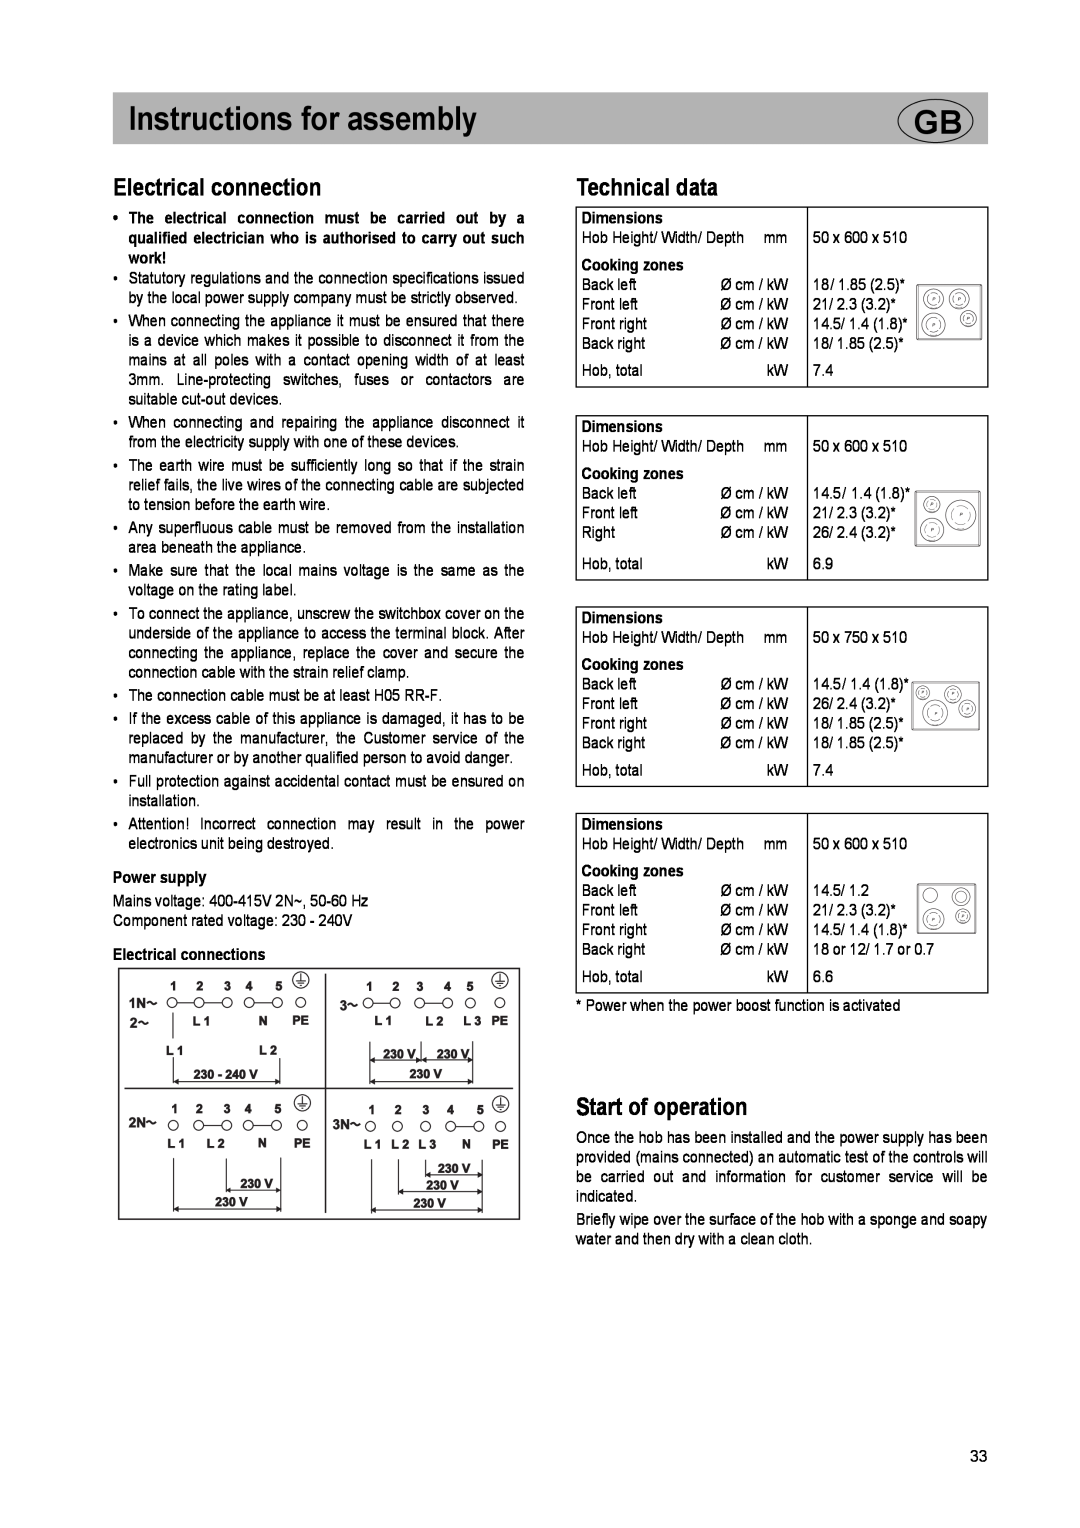 Smeg SE2642ID2 manual Electrical connection, Technical data, Start of operation, Instructions for assembly, Power supply 